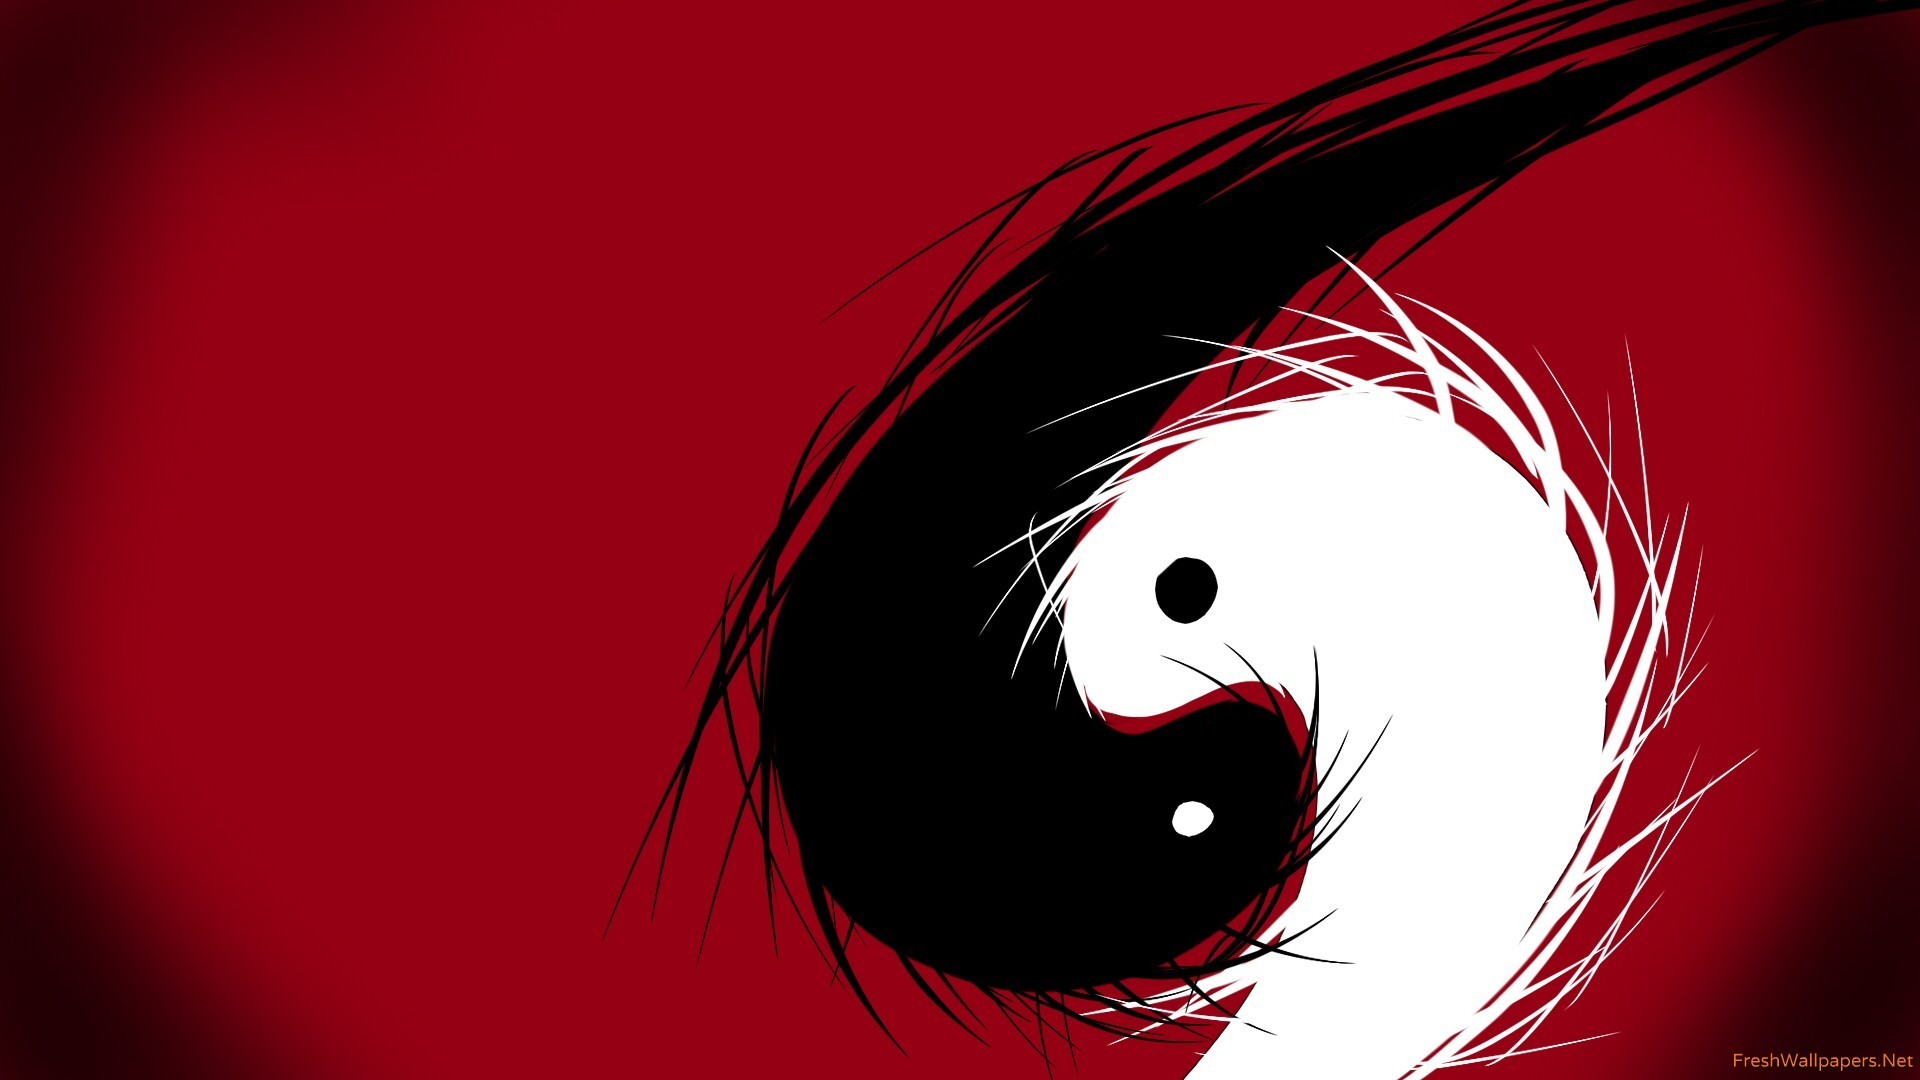 1920x1080 64 best ying yang images on Pinterest